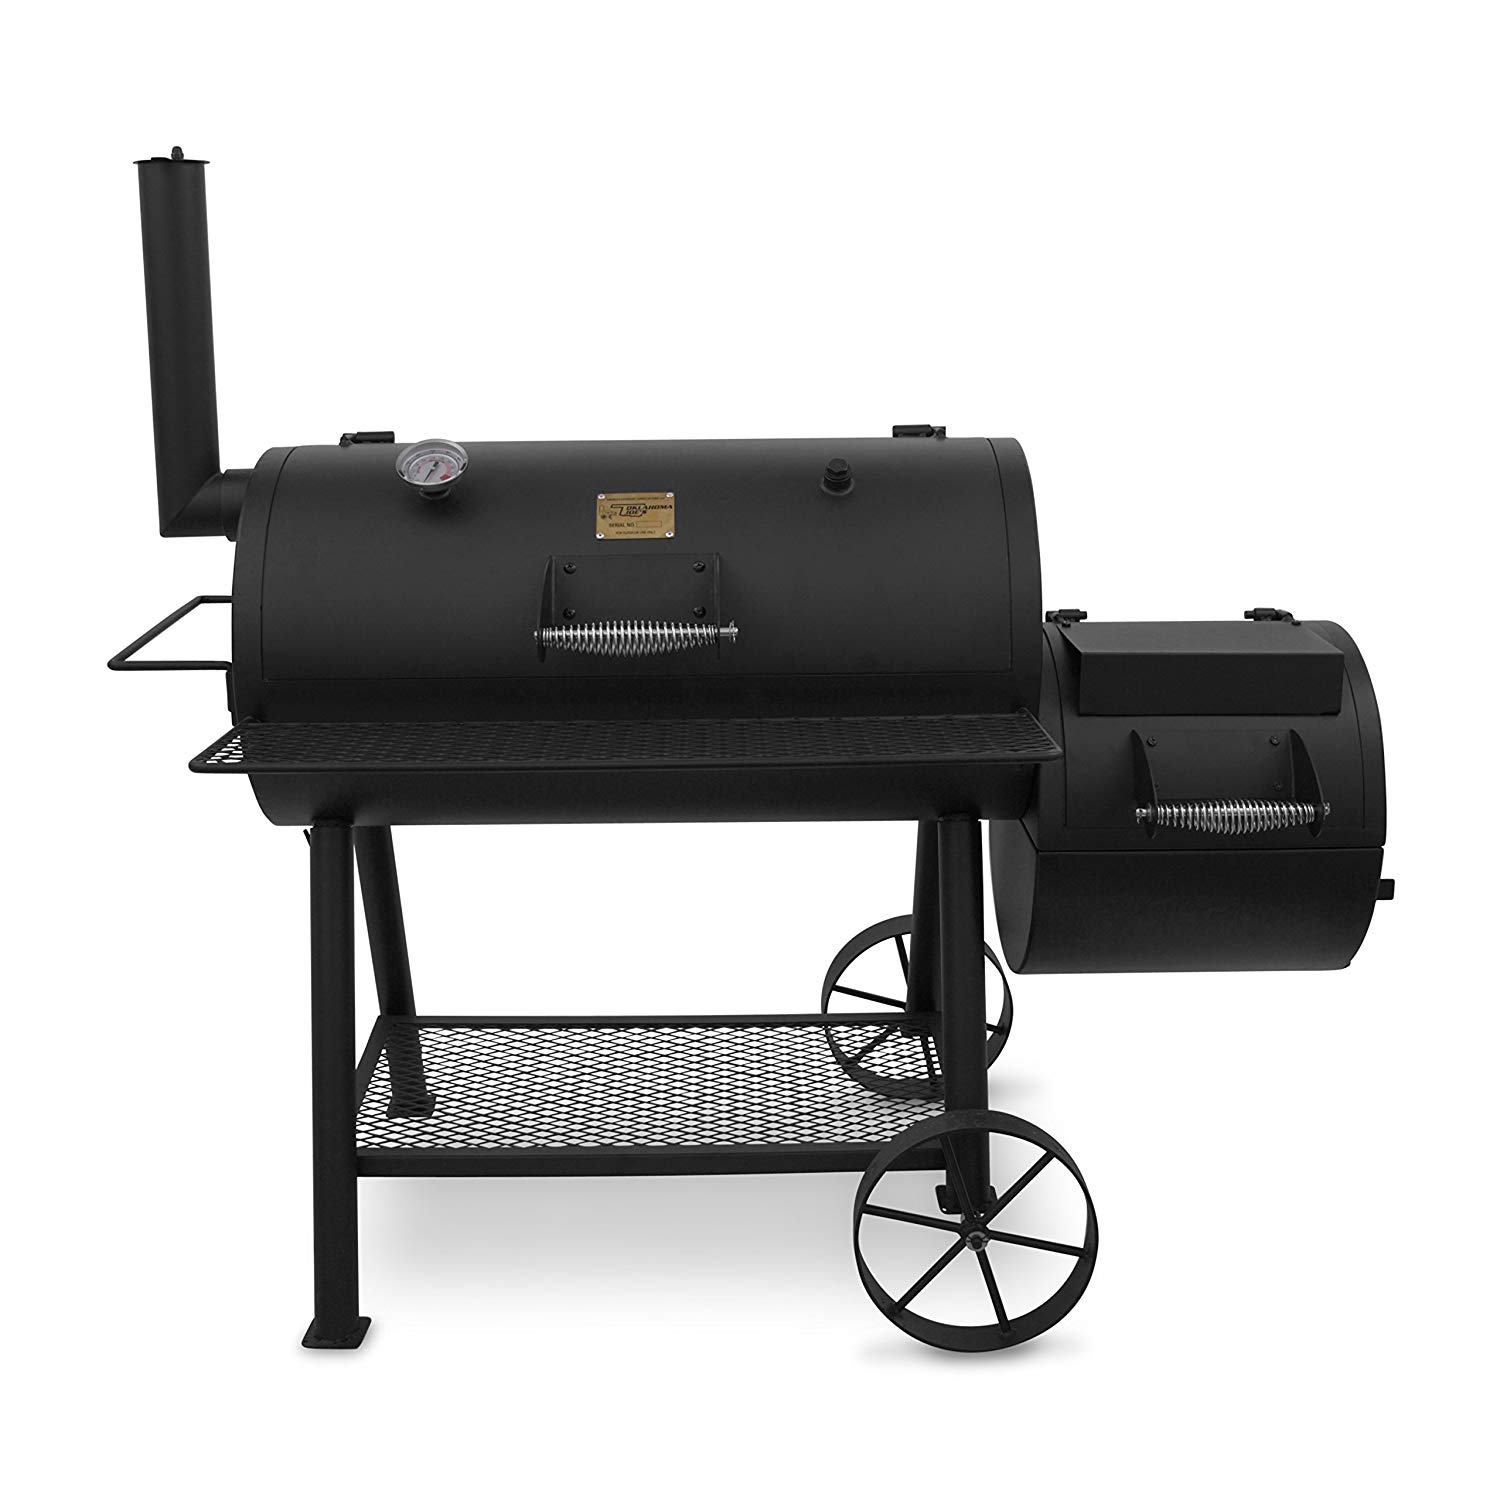 The Basic Steps to Set Up an Offset Smoker